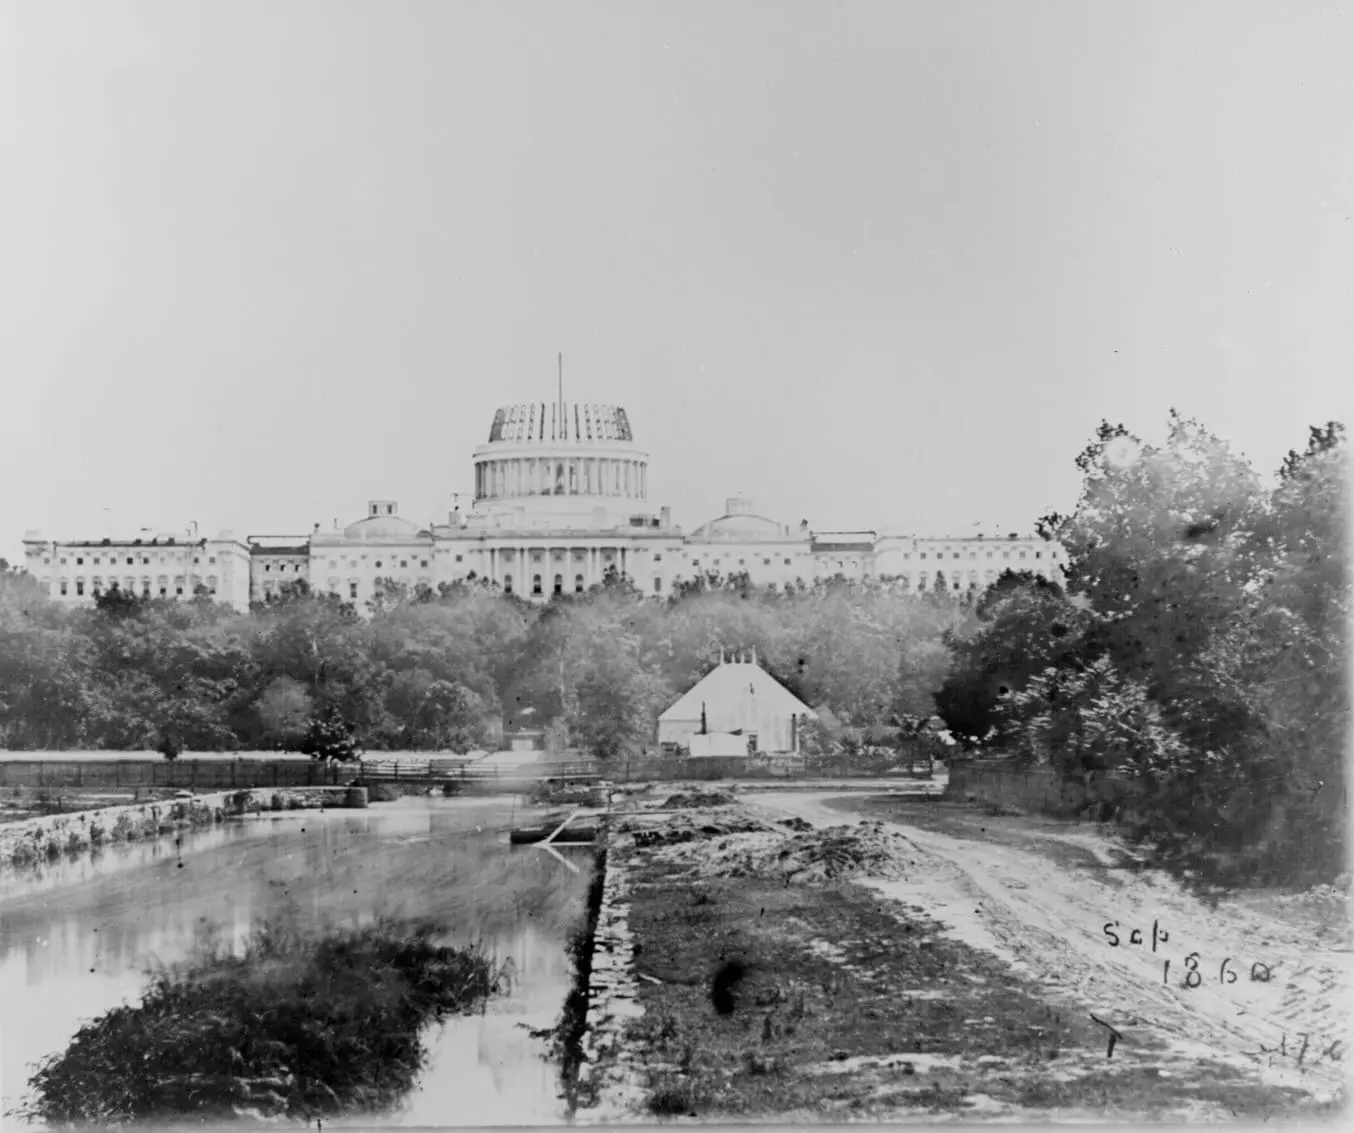 Capitol Dome under construction in 1860